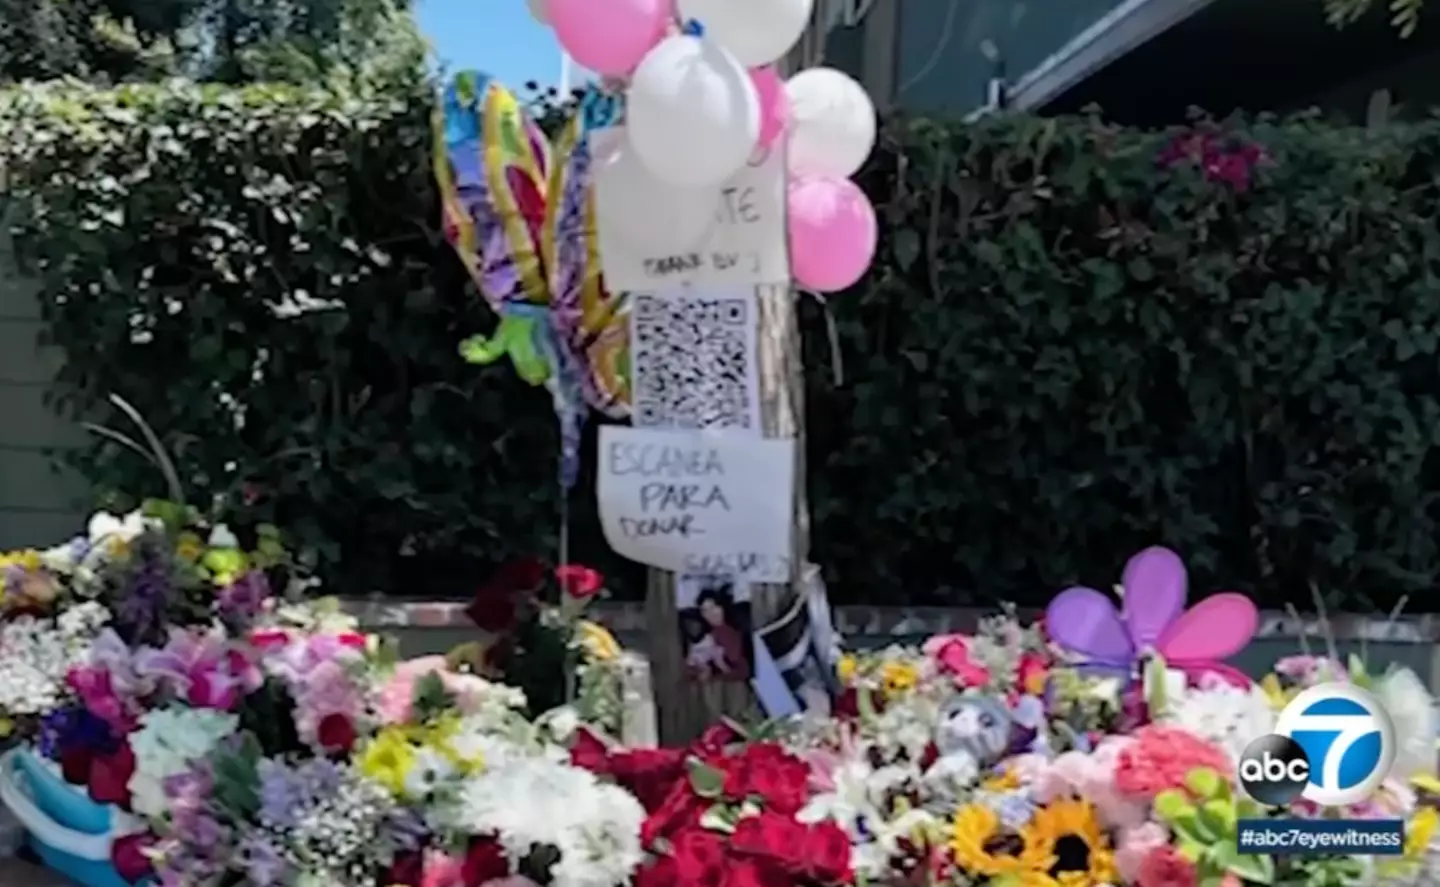 A memorial has been set up outside of the family's home in Van Nuys.